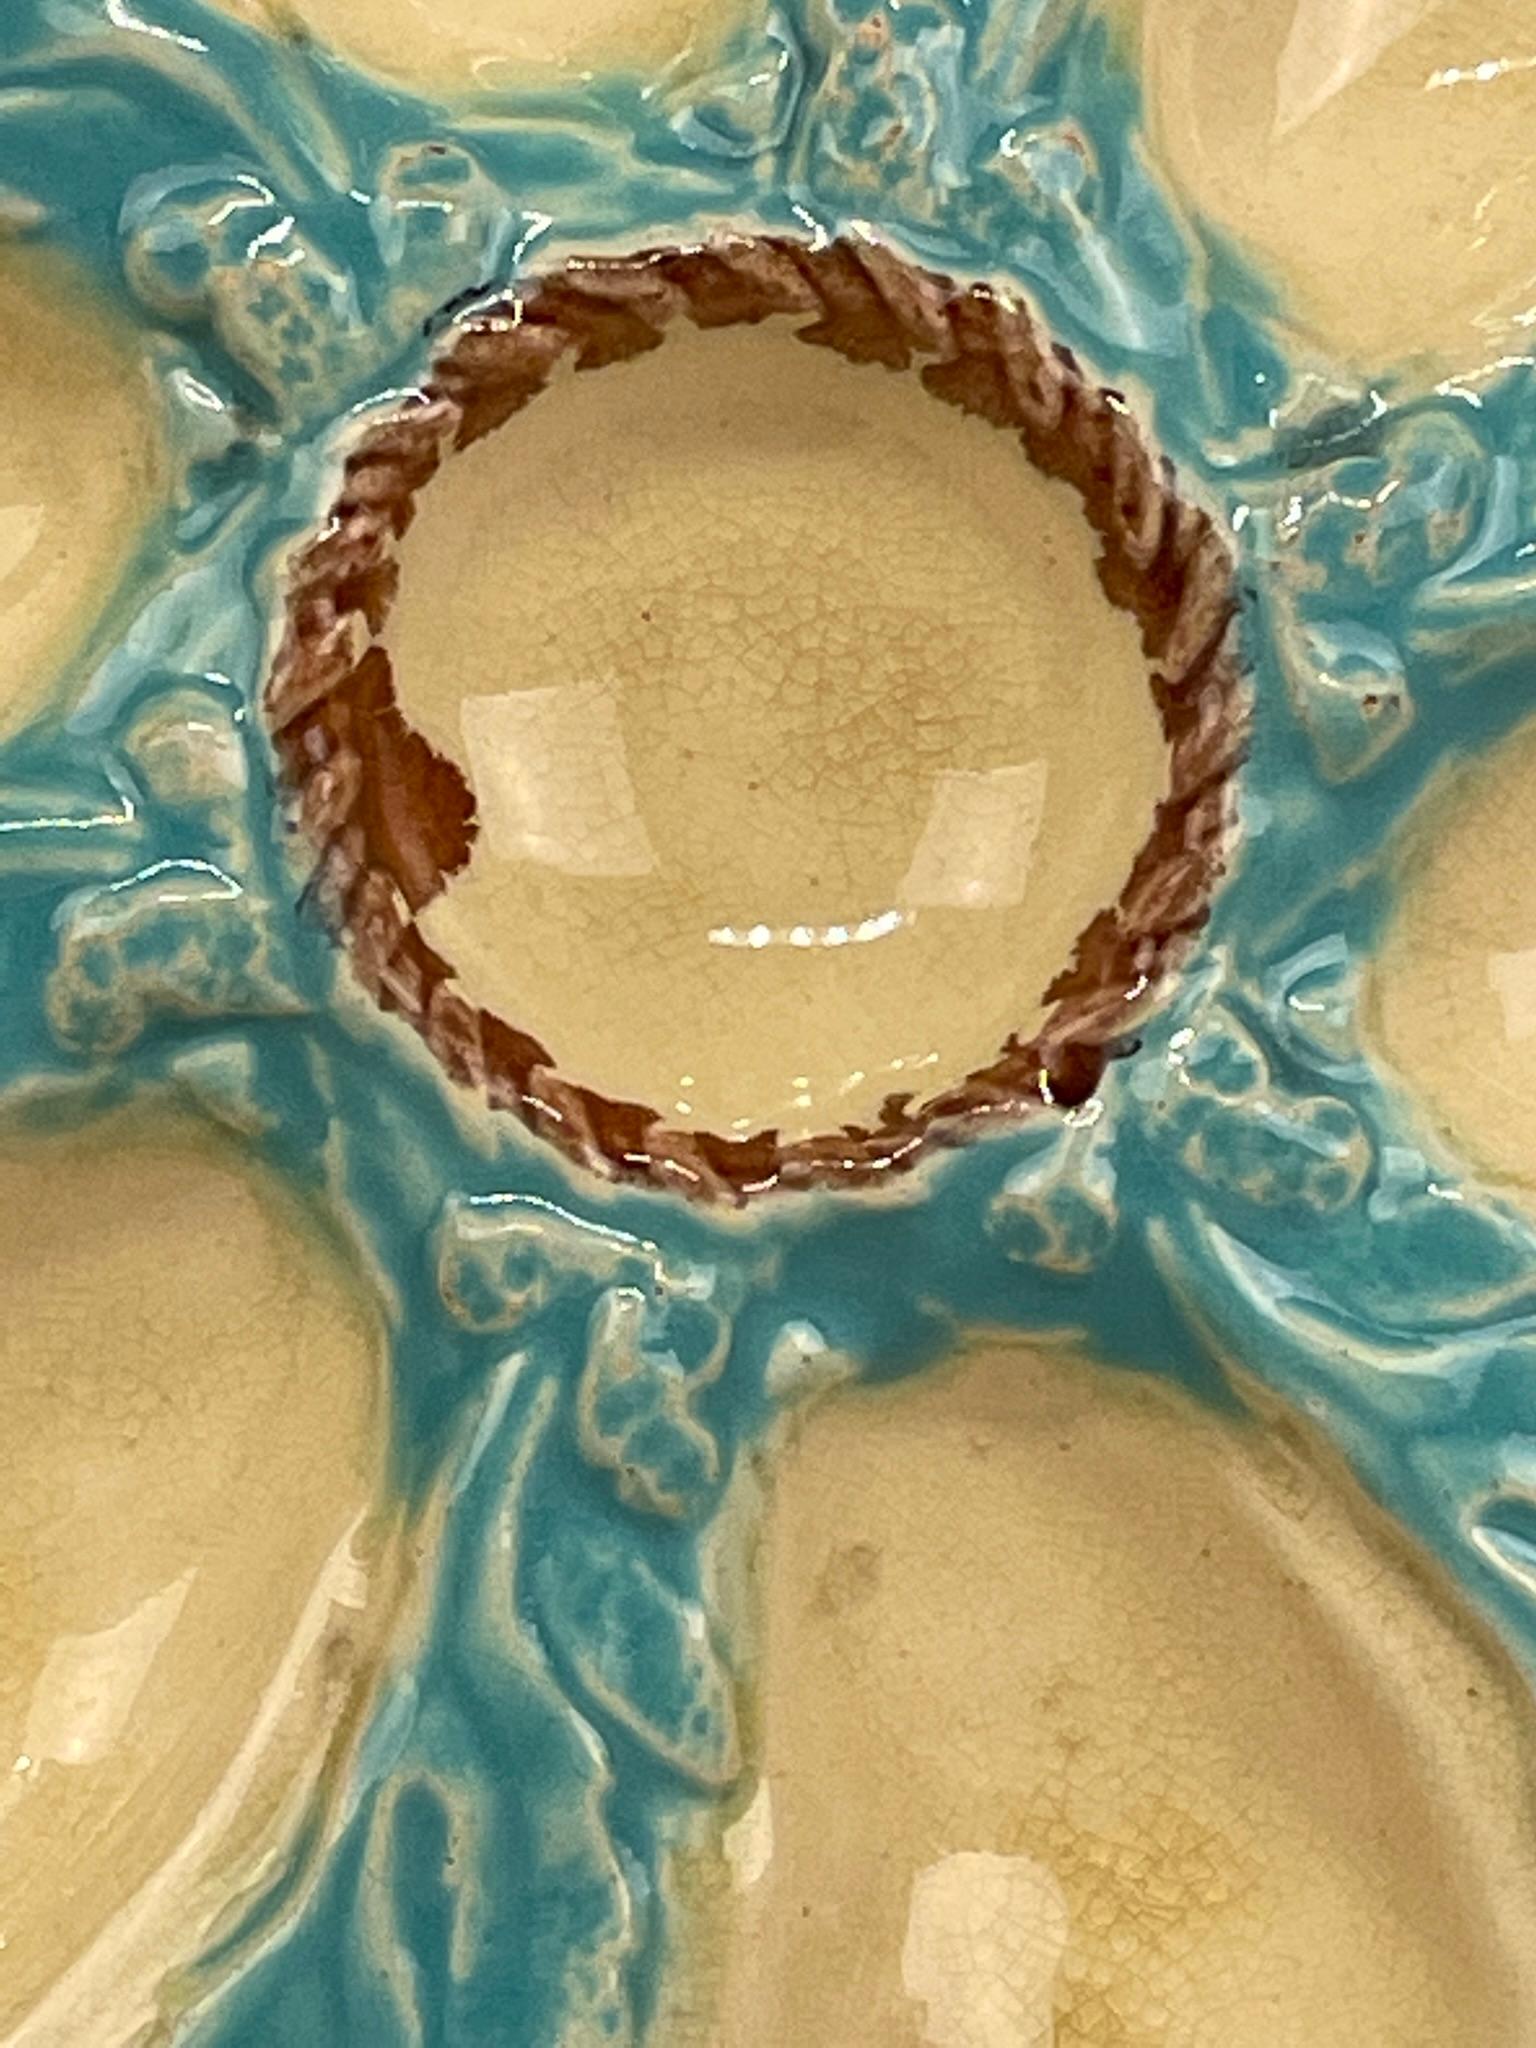 A 19th c English oyster plate with six-well majolica glazed oyster plate by Fielding & Co. Ltd., Stoke-on-Trent, England, circa 1875-1880.. Cream oyster wells surround a center well and light turquoise seaweed. A light chocolate brown nautical rope